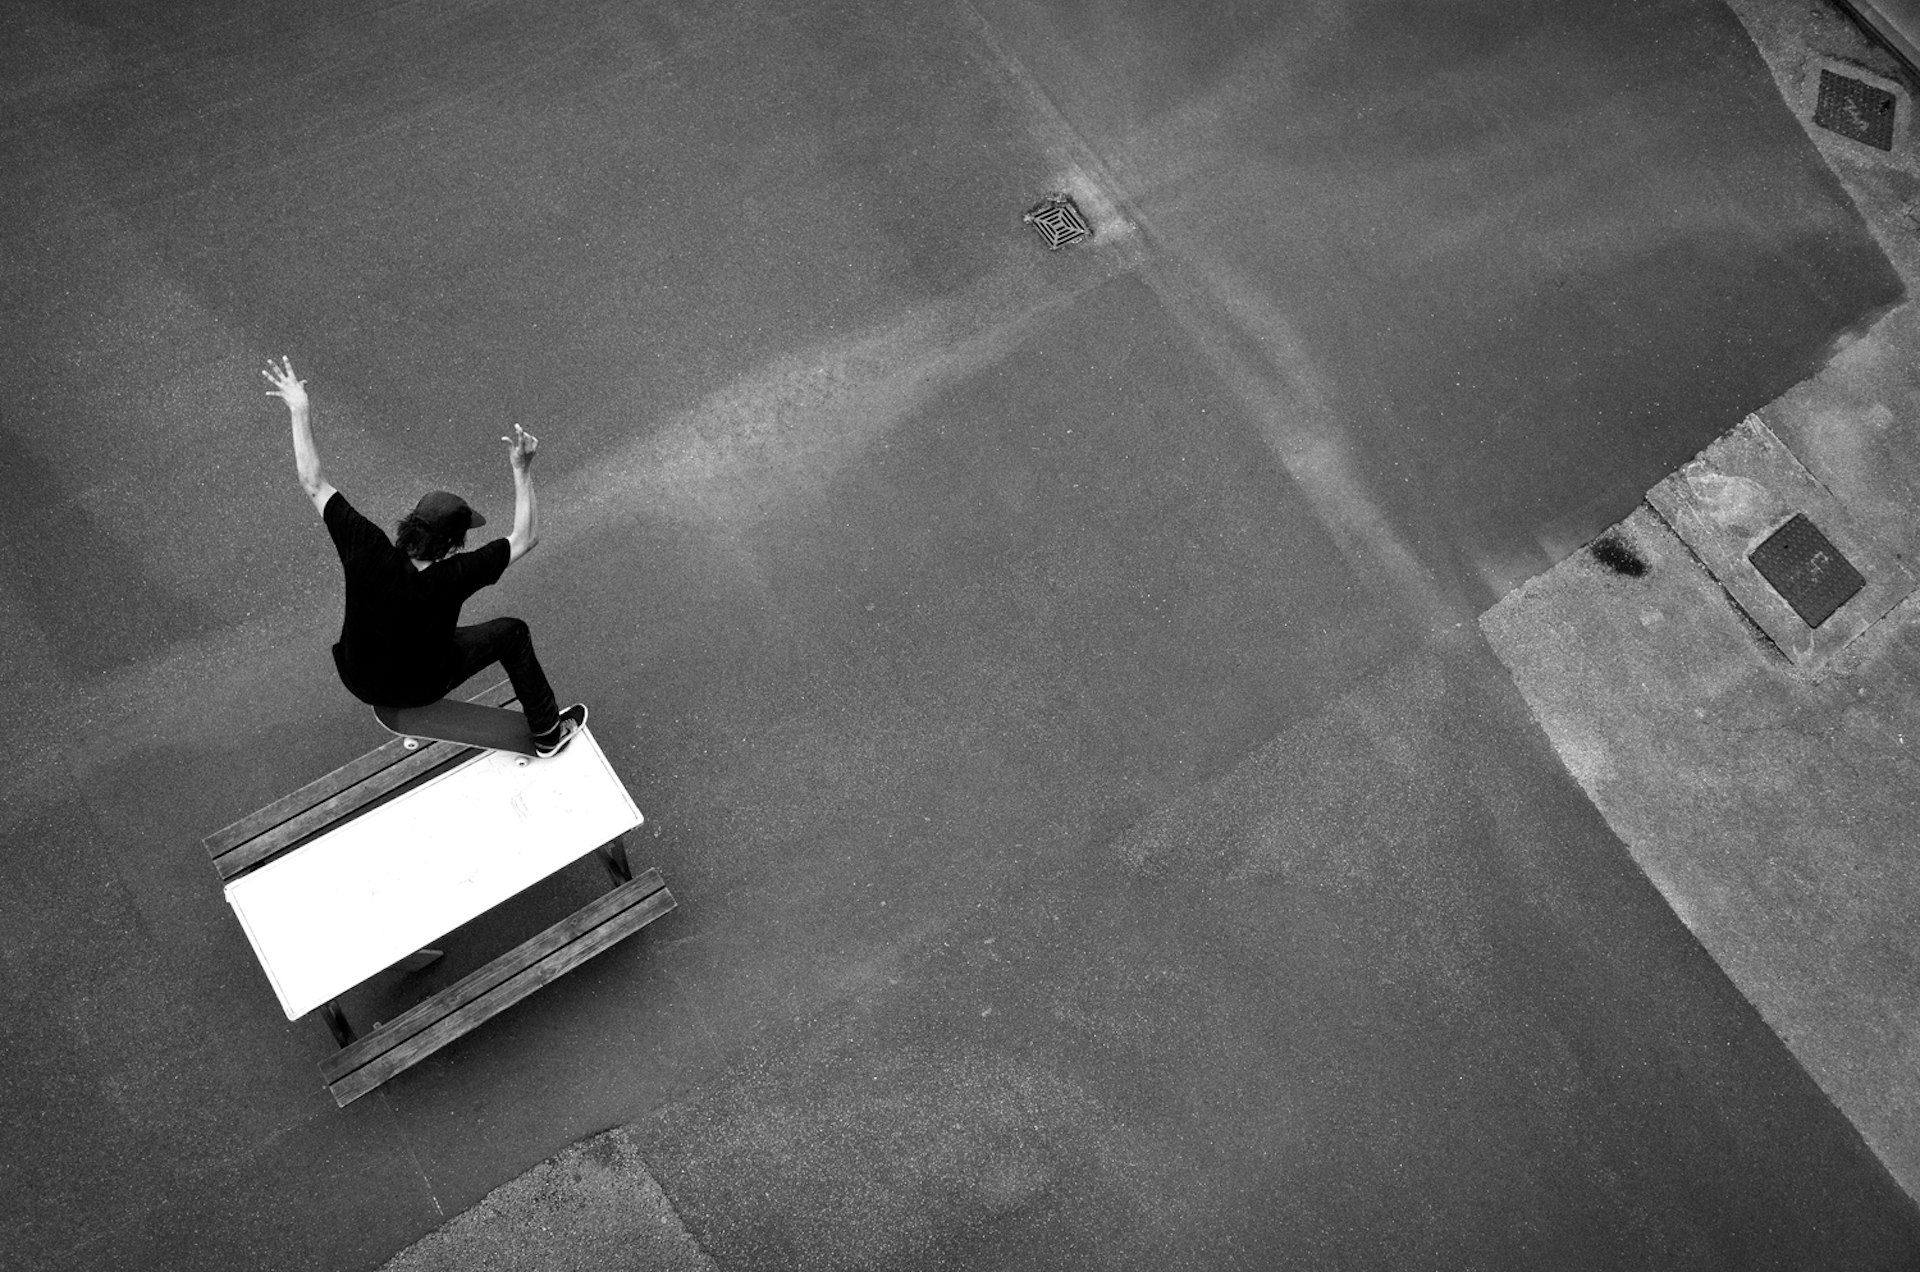 A photographic journey through the compass points of UK skateboarding